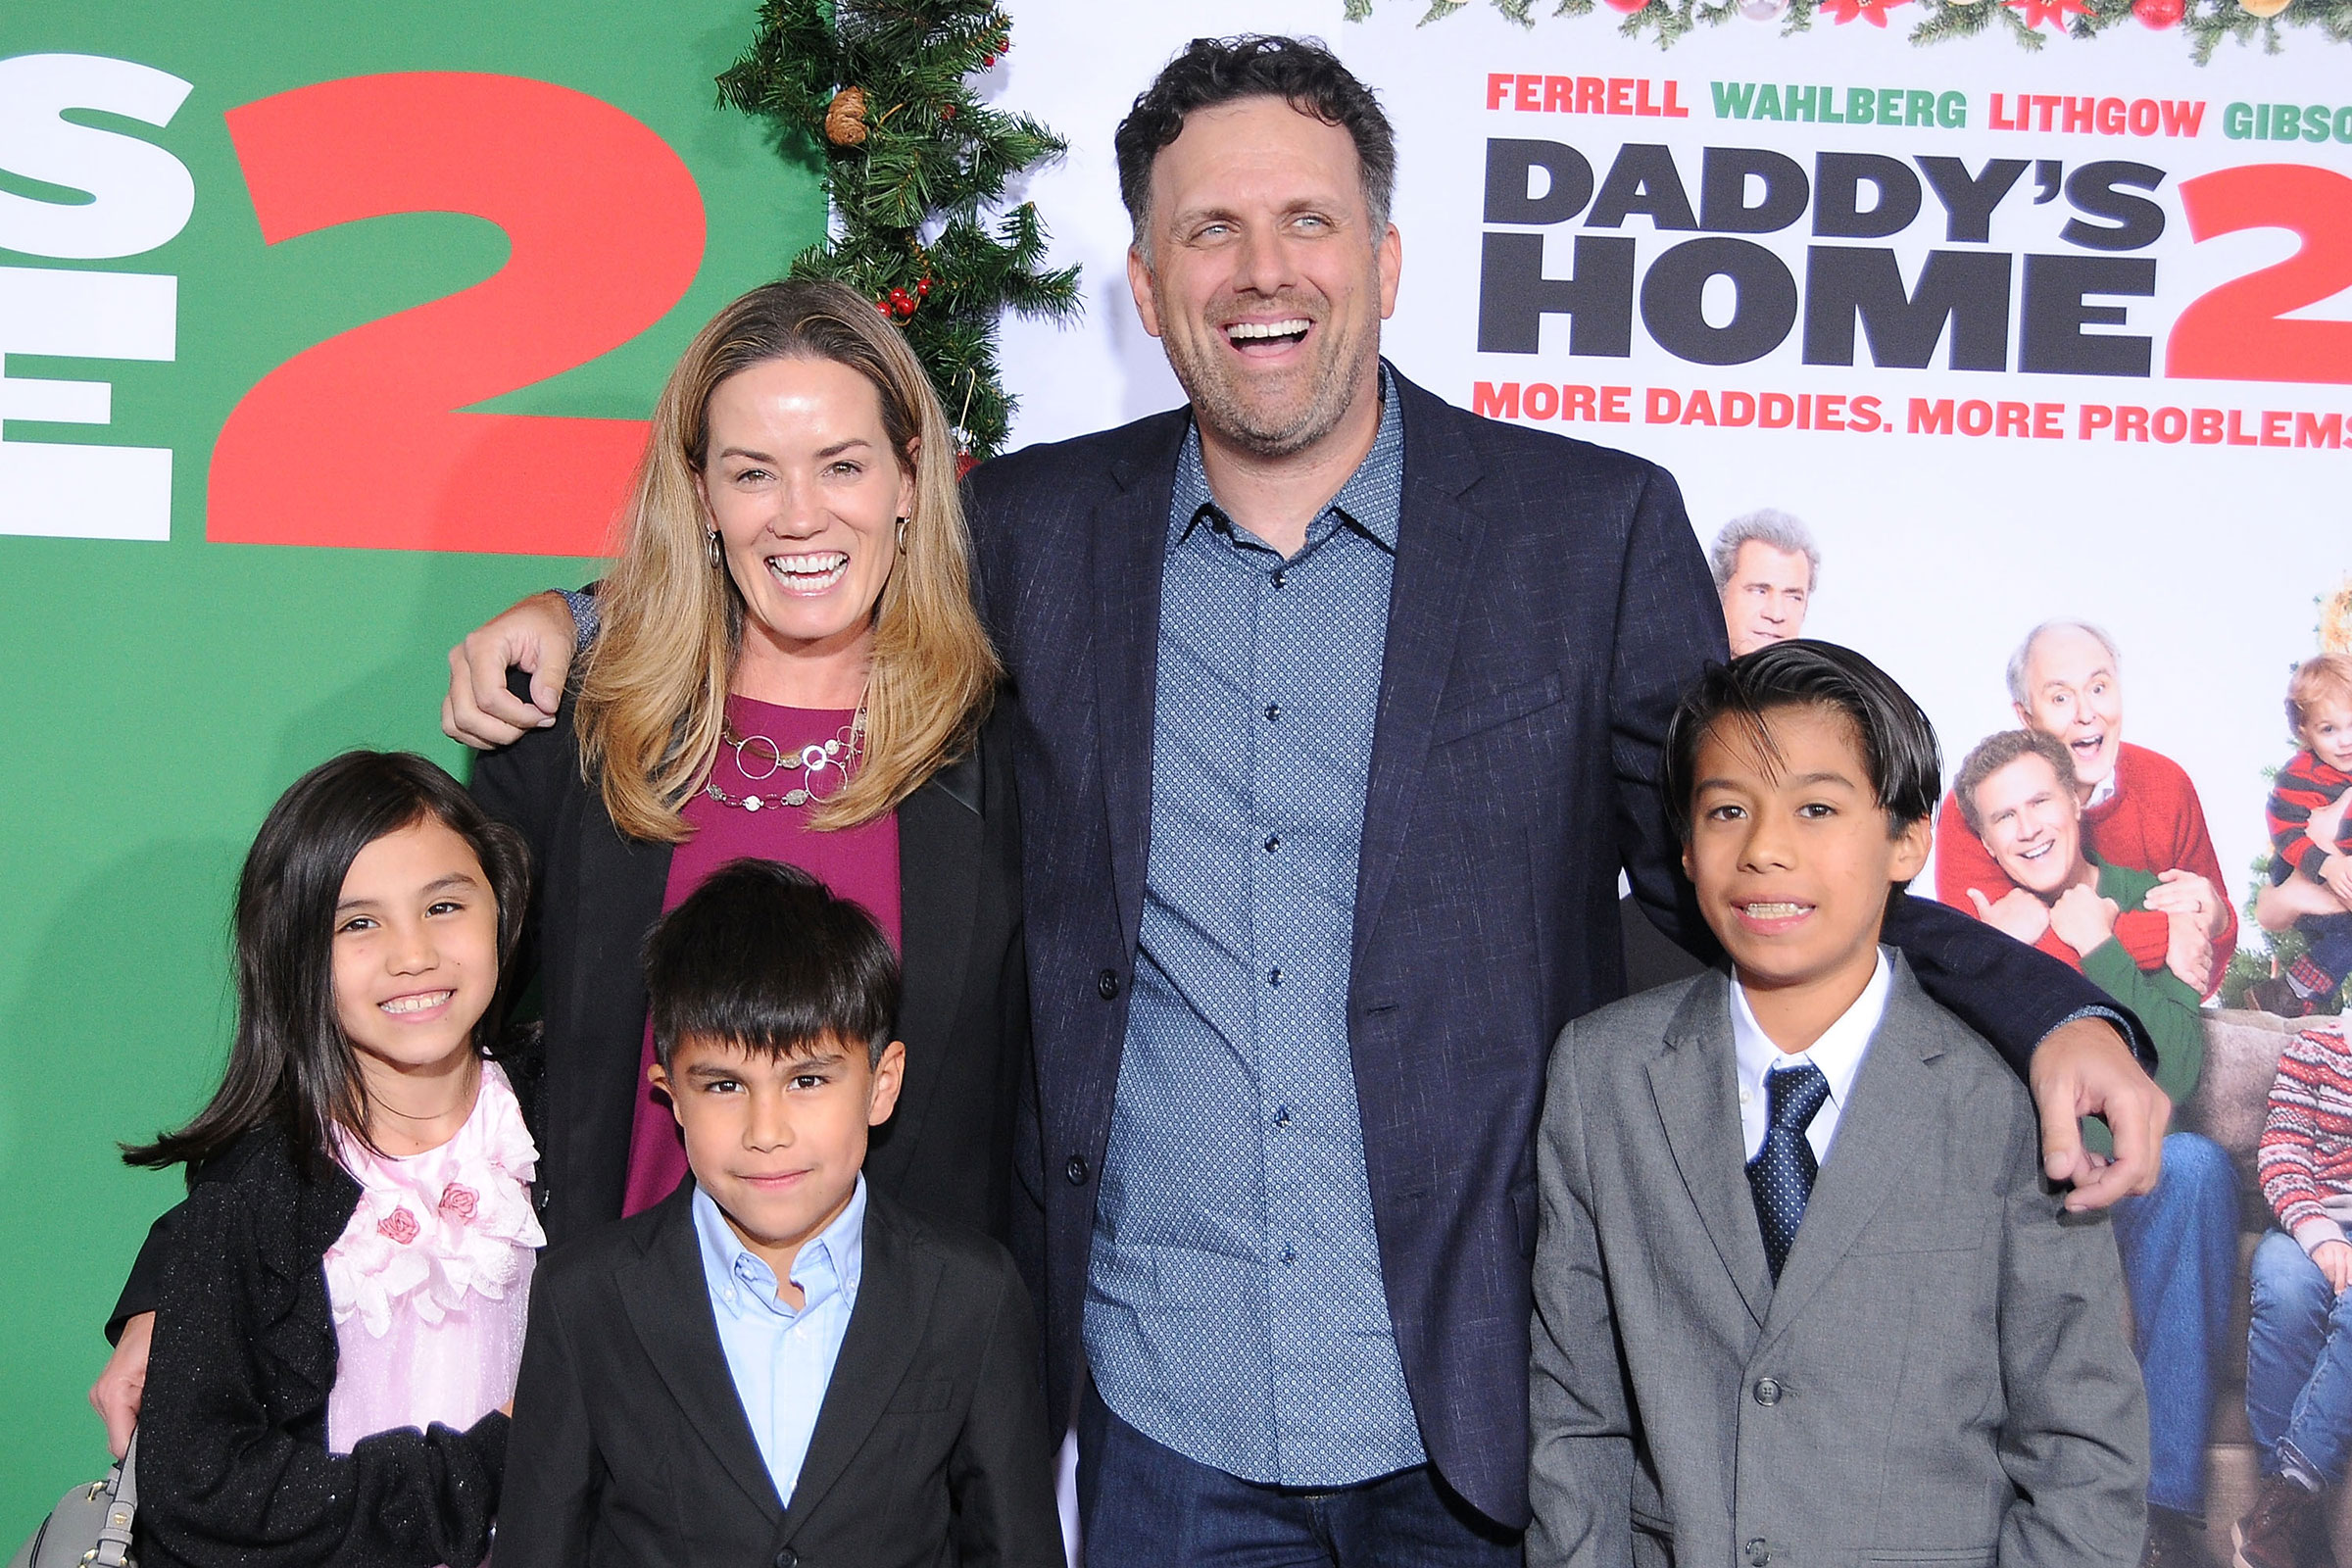 Director Sean Anders and family attend the premiere of Paramount Pictures' 'Daddy's Home 2' at Regency Village Theatre on November 5, 2017 in Westwood, California. (Barry King—Getty Images)